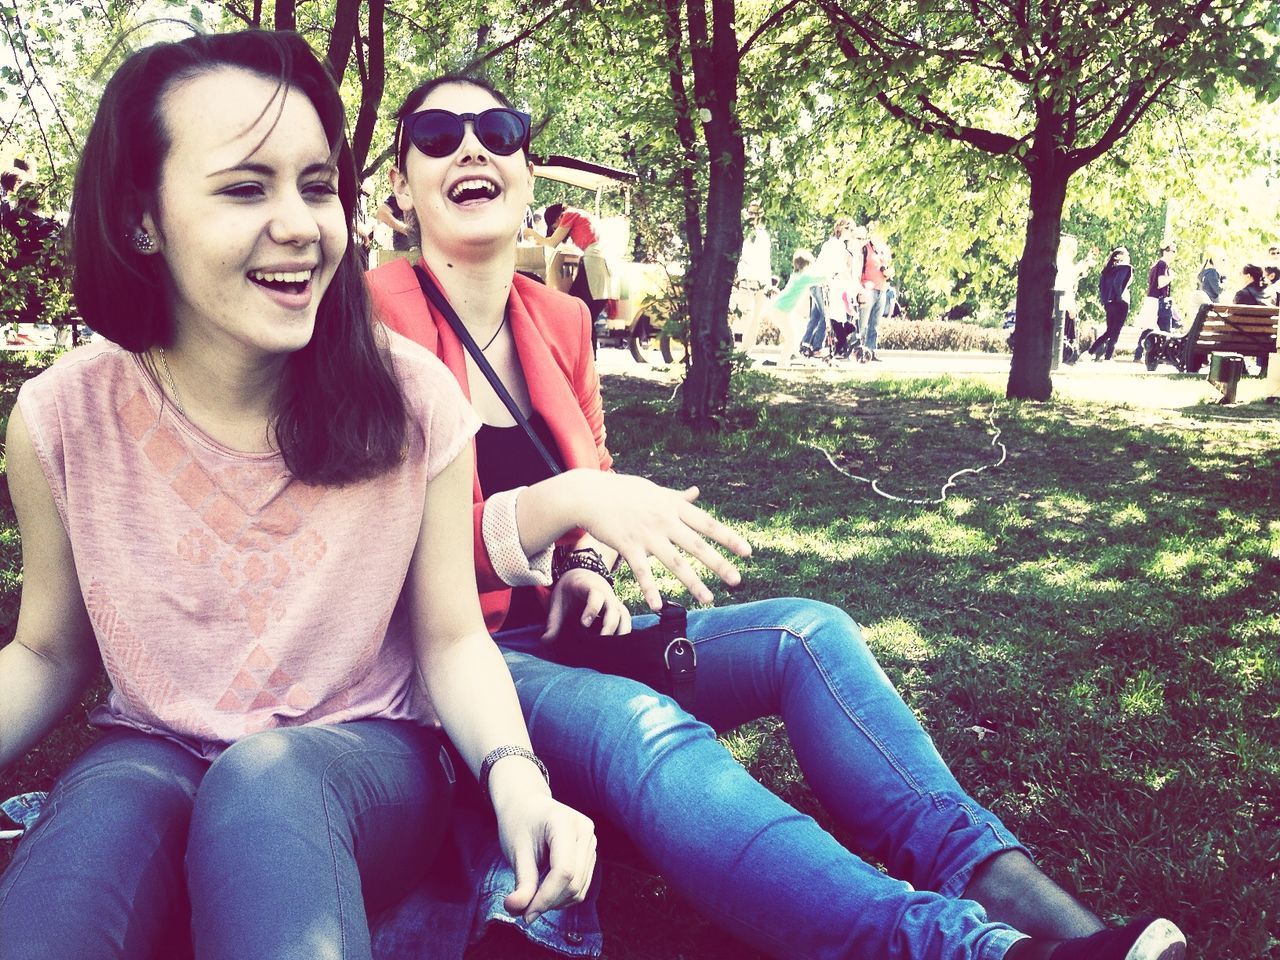 lifestyles, person, leisure activity, young adult, togetherness, smiling, casual clothing, looking at camera, bonding, portrait, happiness, young women, tree, sitting, love, front view, friendship, park - man made space